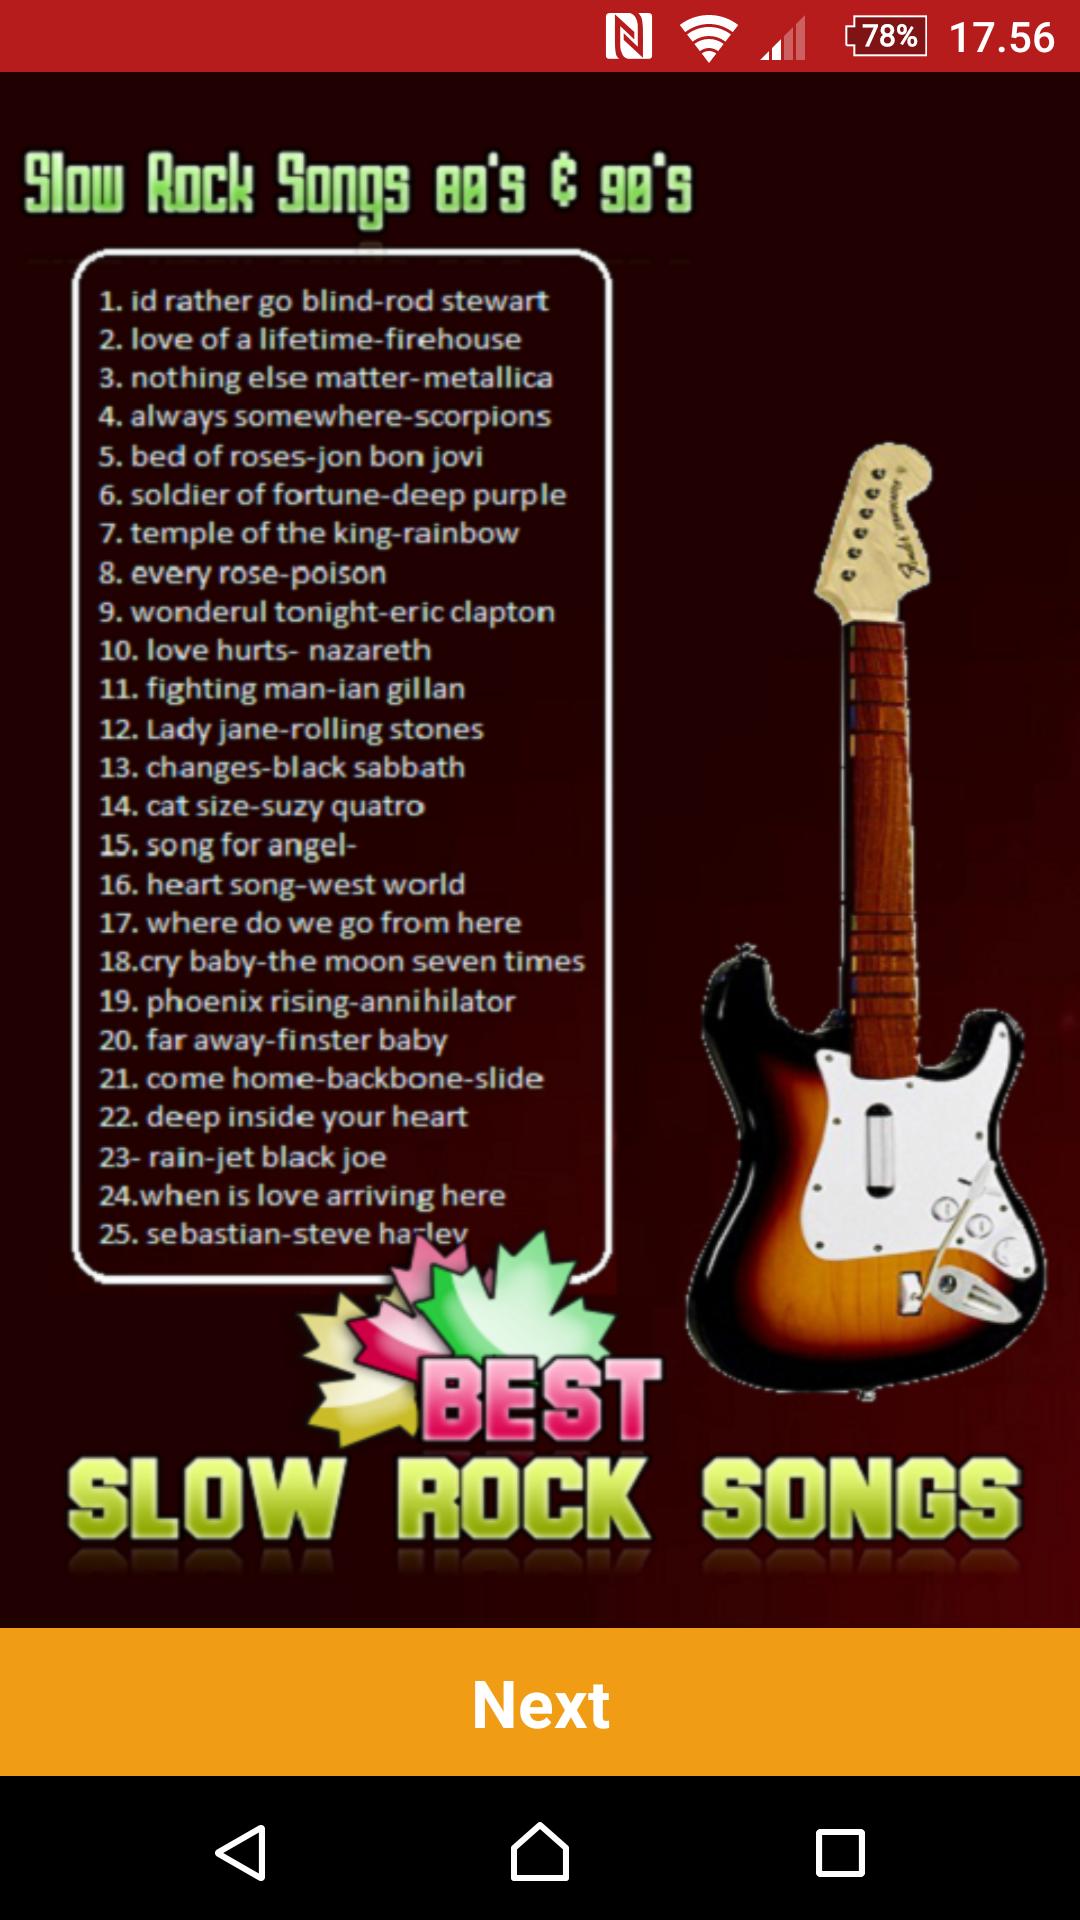 Best Slow Rock Songs 80's & 90's for Android - APK Download